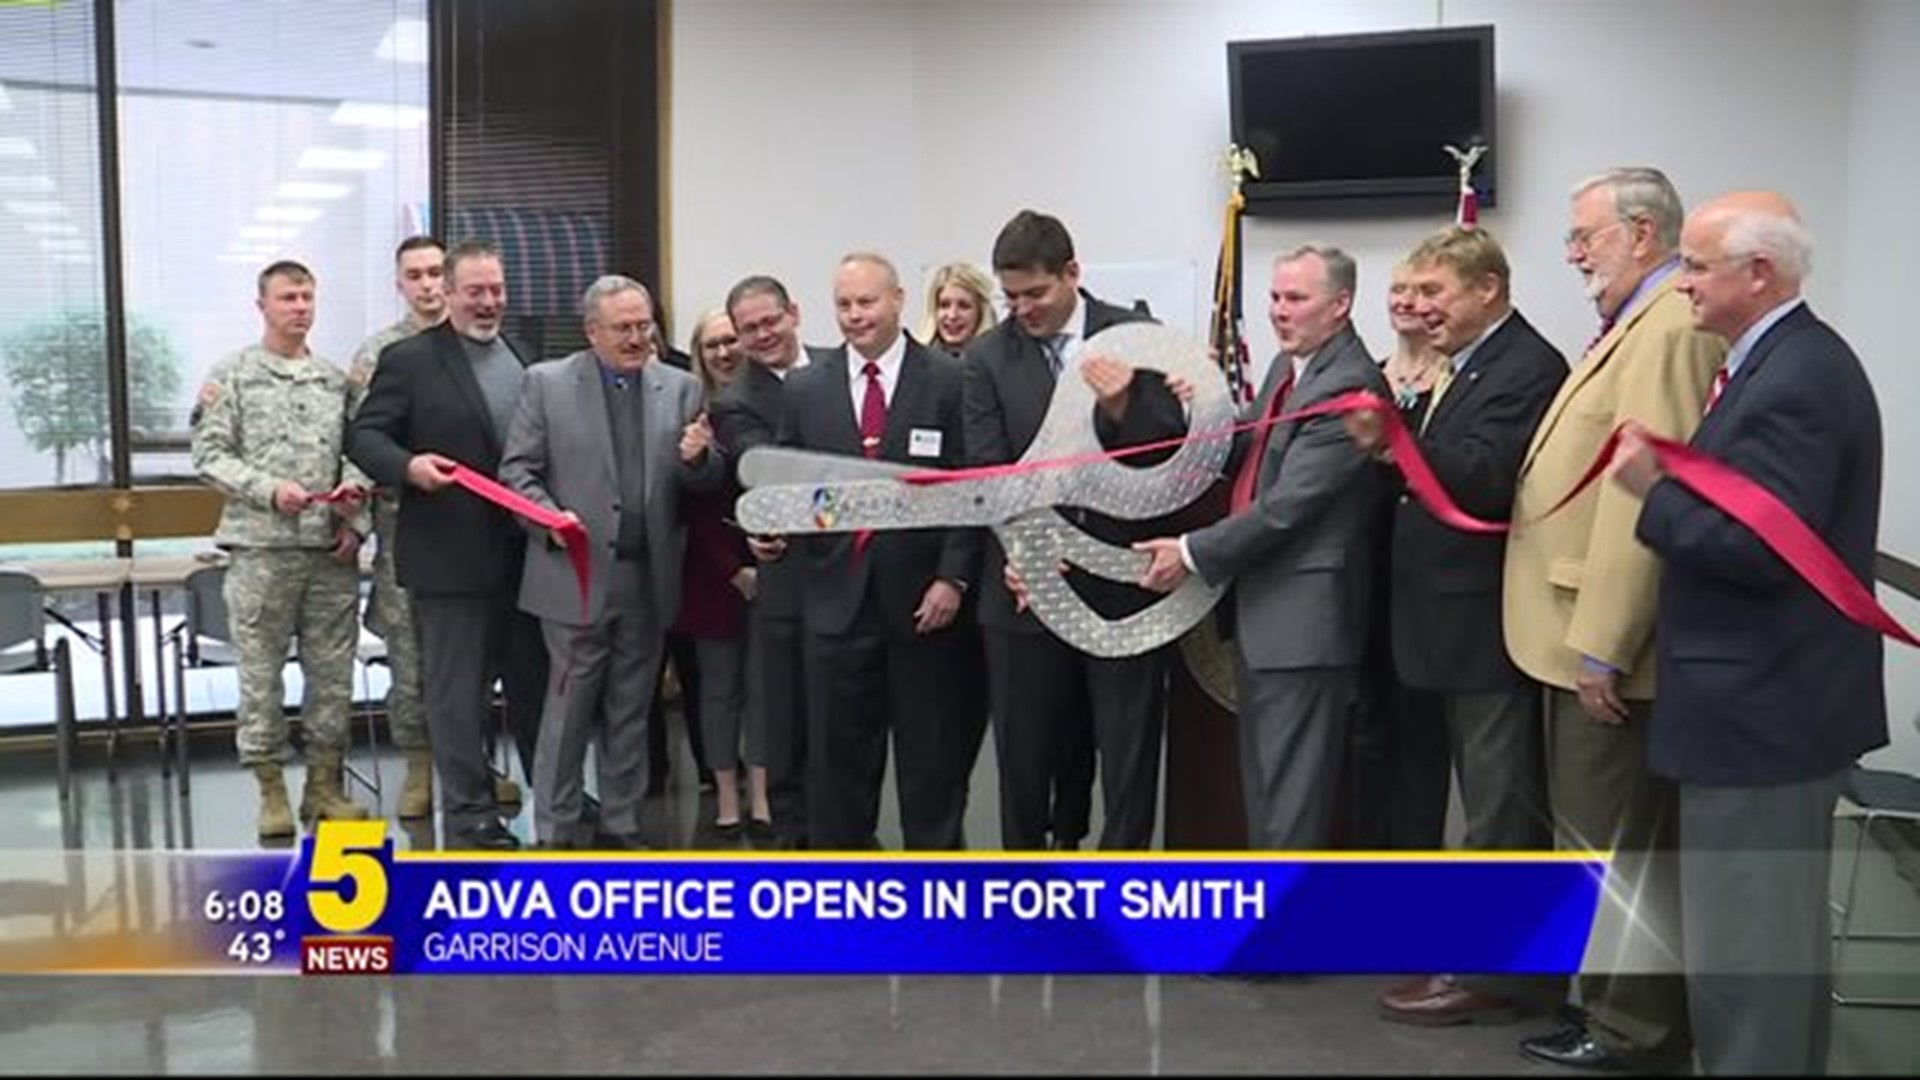 ADVA OPENS OFFICE IN FORT SMITH